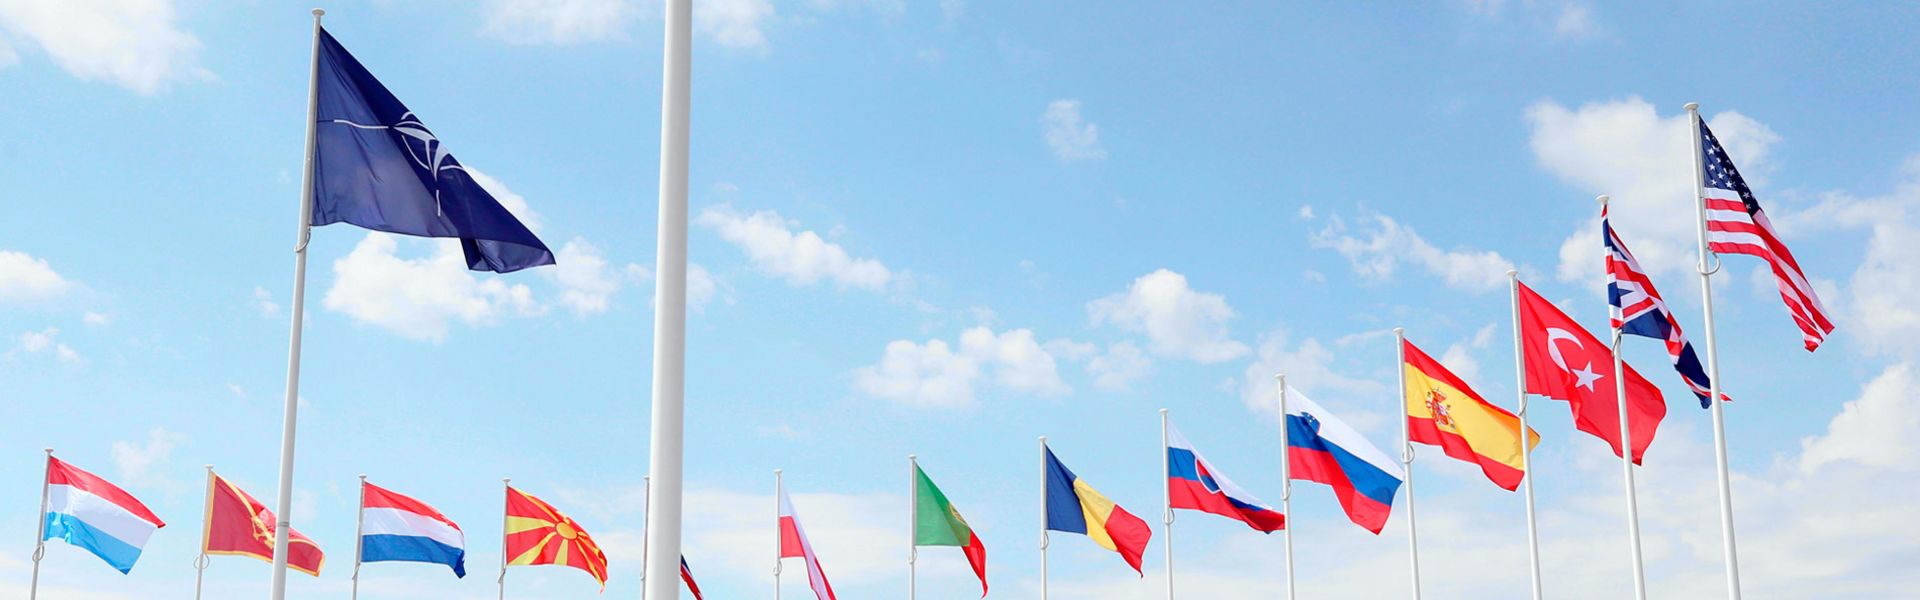 The flags of members of North Atlantic Treaty Organization (NATO) are seen at the Headquarter of NATO in Brussels.